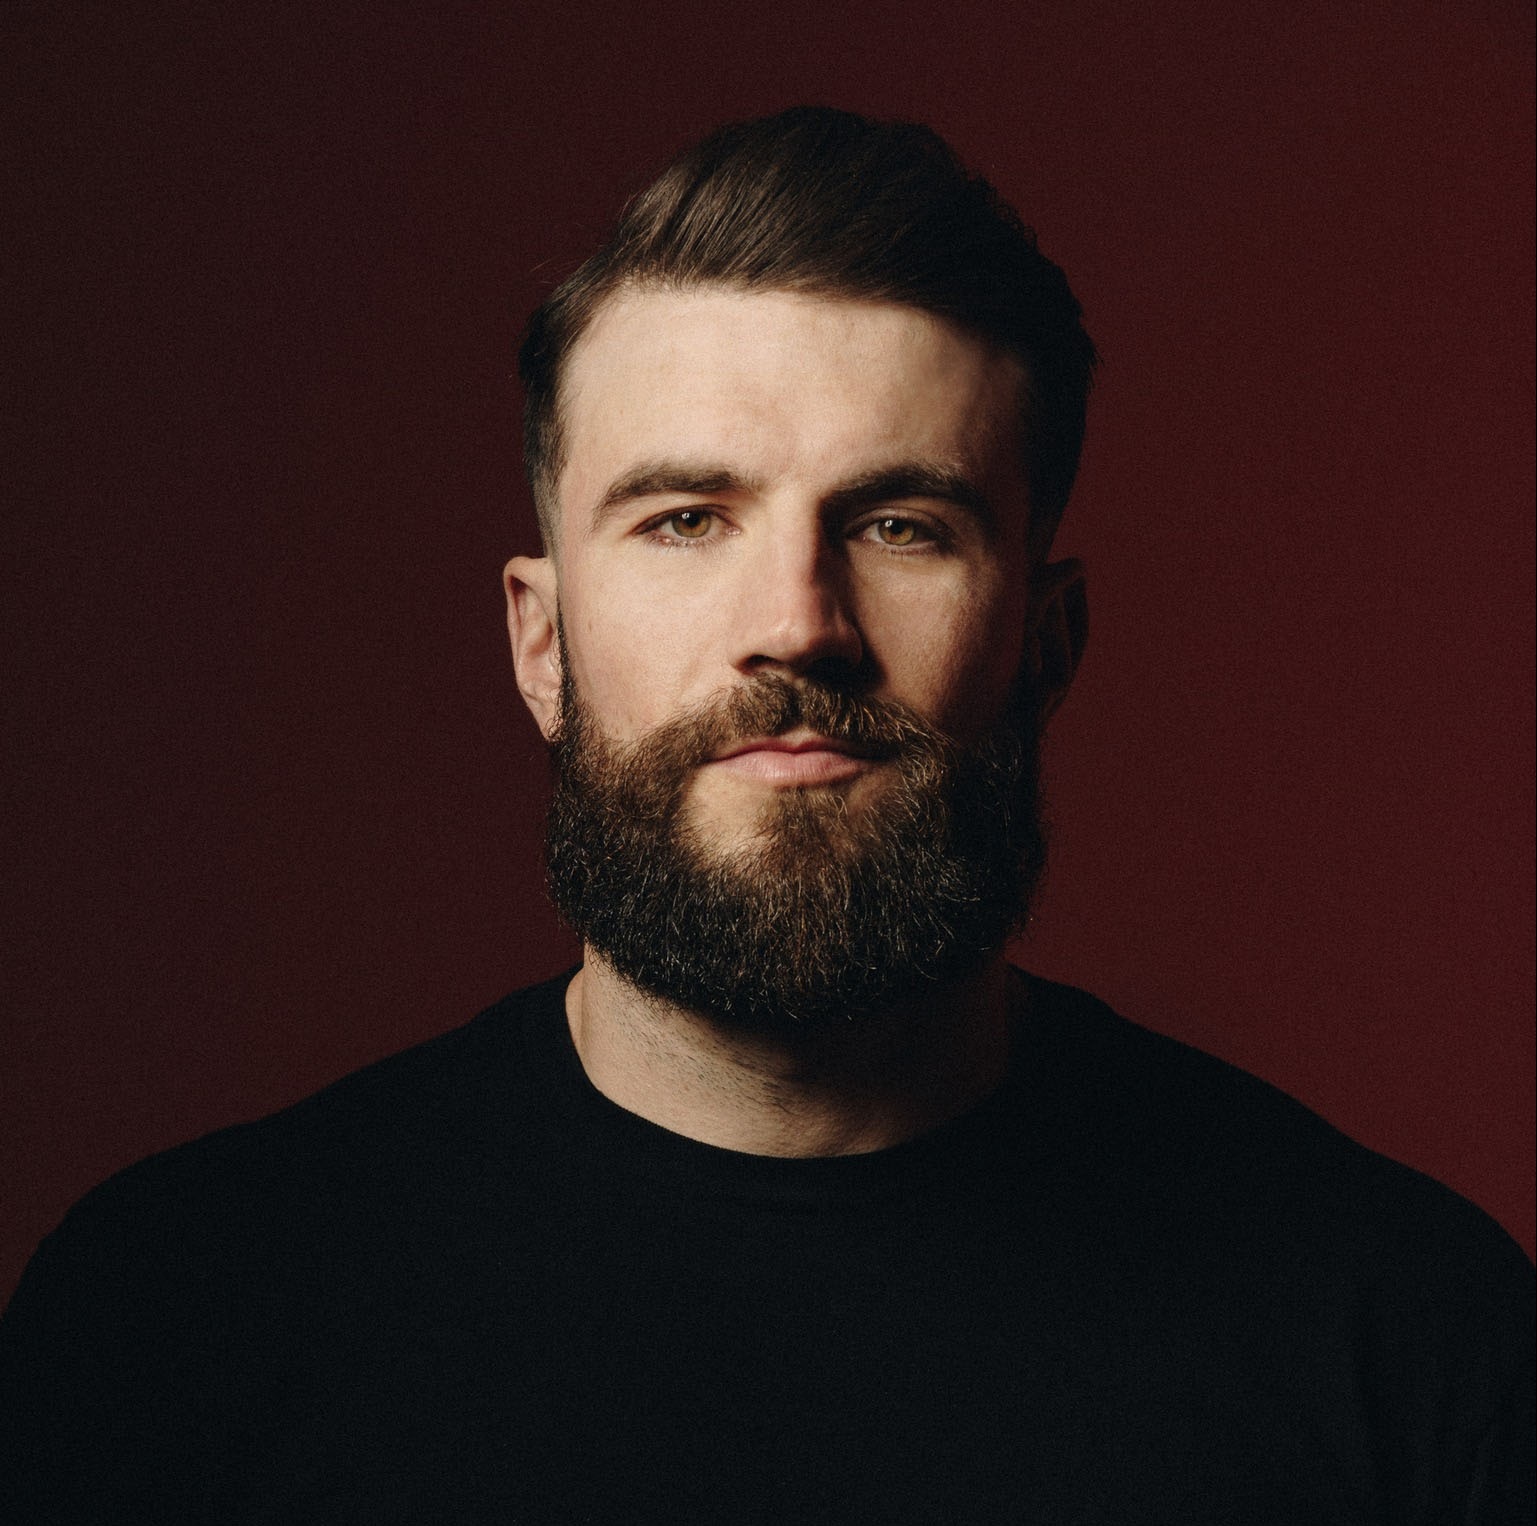 SAM HUNT RELEASES THE OFFICIAL VIDEO FOR “DOWNTOWN’S DEAD.”